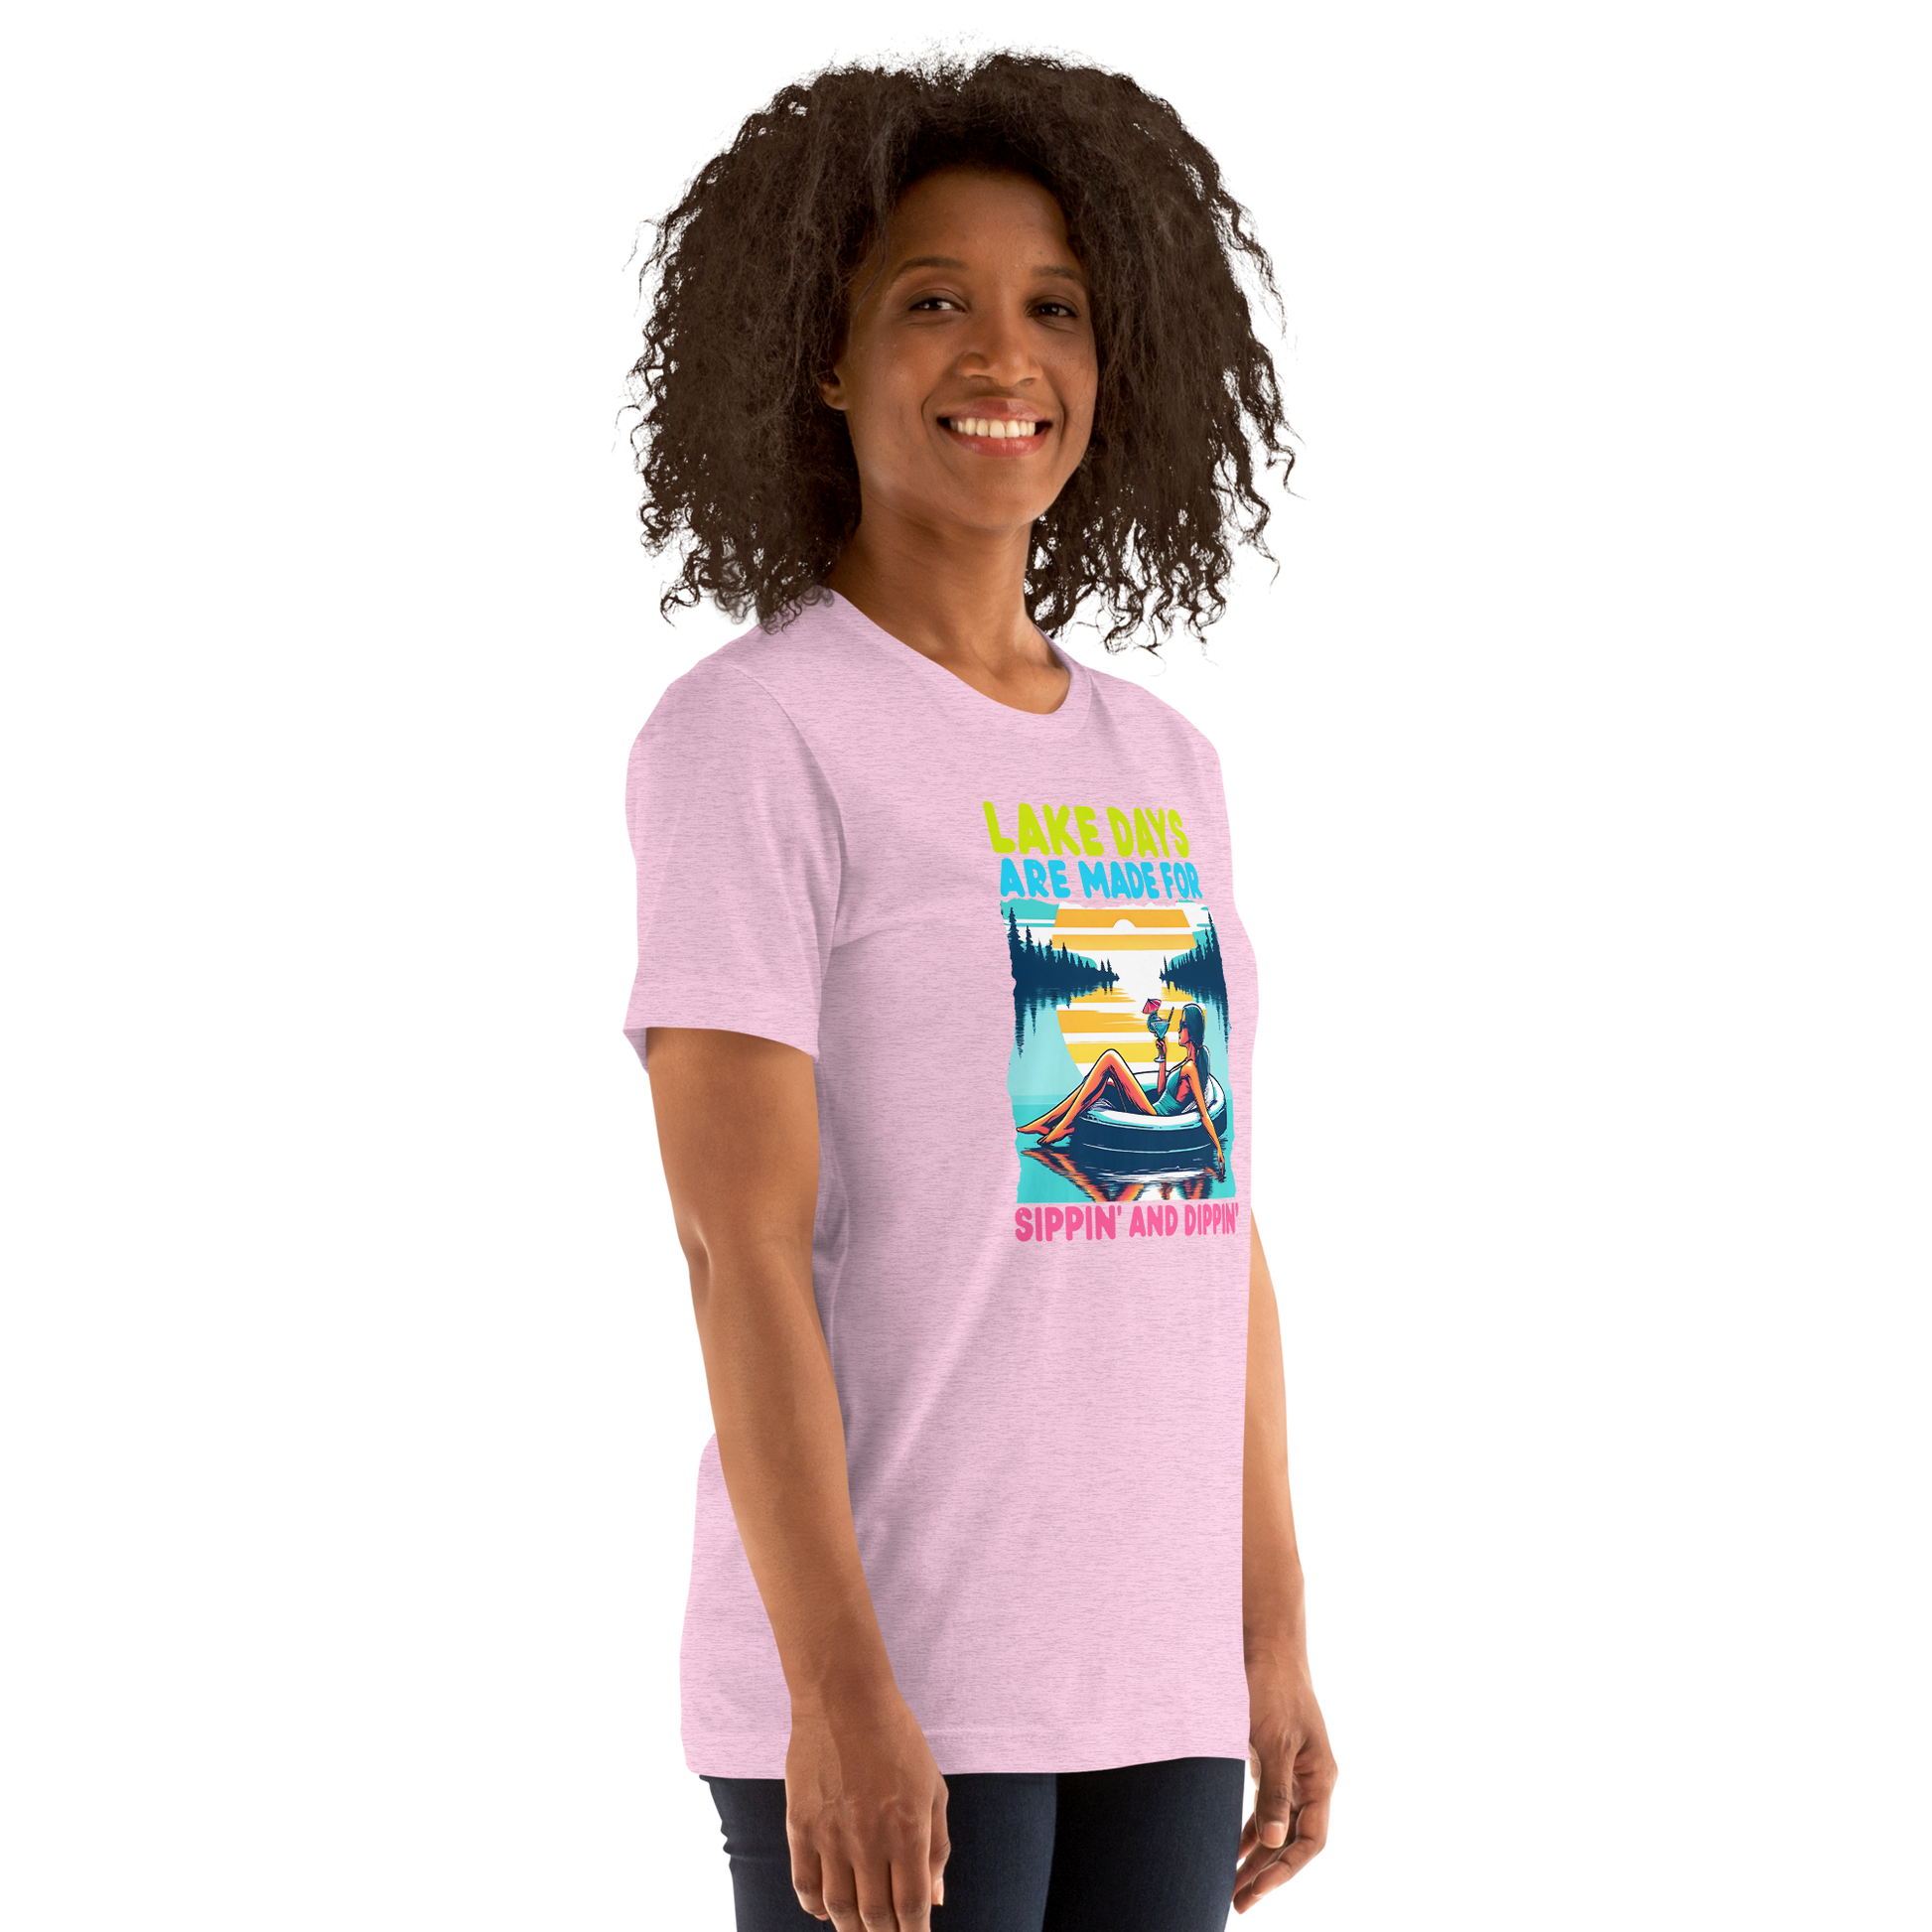 Tee with "Lake Days Are Made for Sipping and Dipping," featuring a woman on a tube float with a cocktail, lake and sunset backdrop.